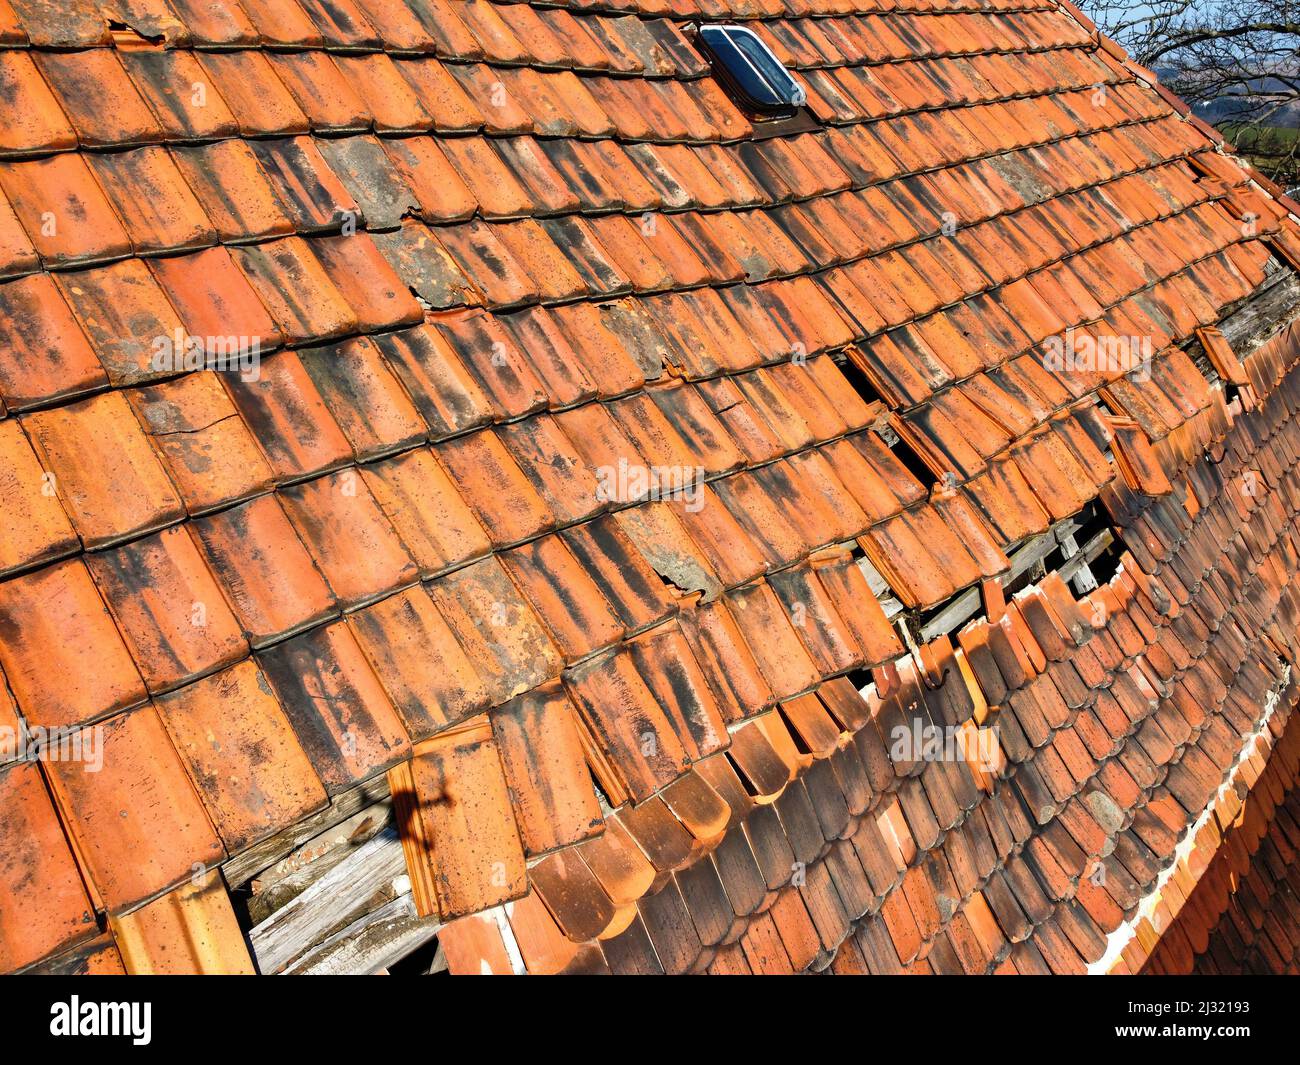 Old bricks on a roof Stock Photo